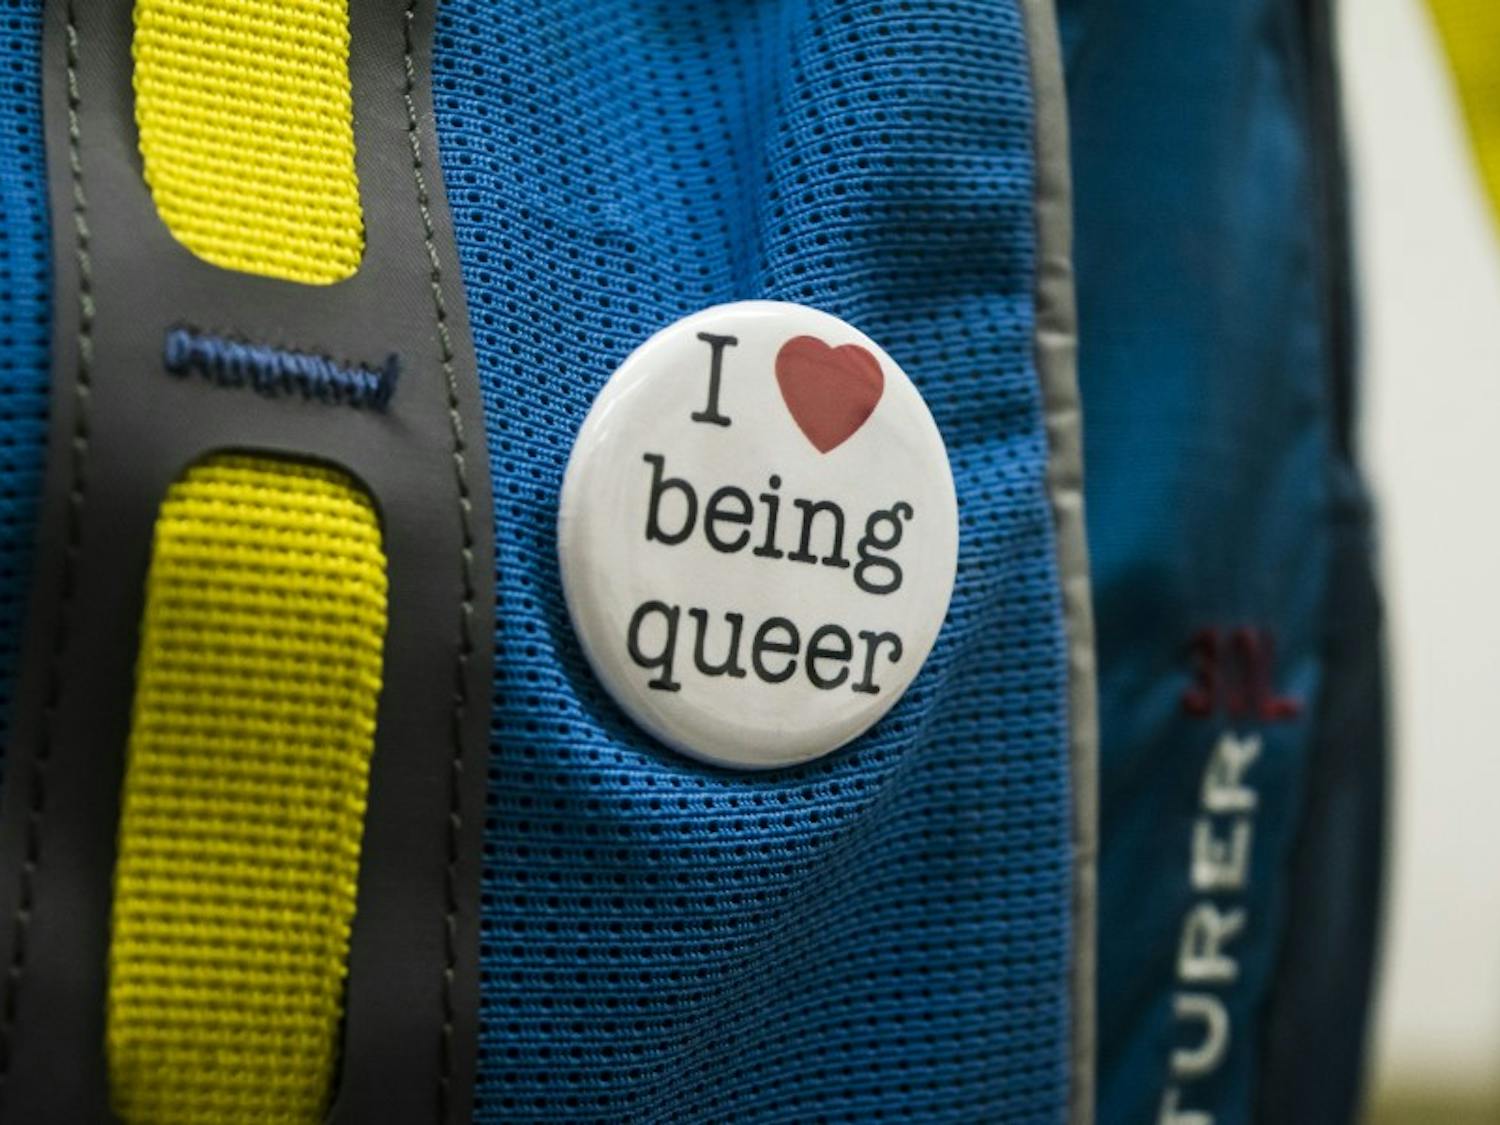 Oct. 11 marked National Coming Out Day, which annually encourages people identifying as LGBTQ+ to embrace their identity. October is also LGBTQ+ History Month, along with the UW-Madison LGBT Campus Center’s 25th birthday.